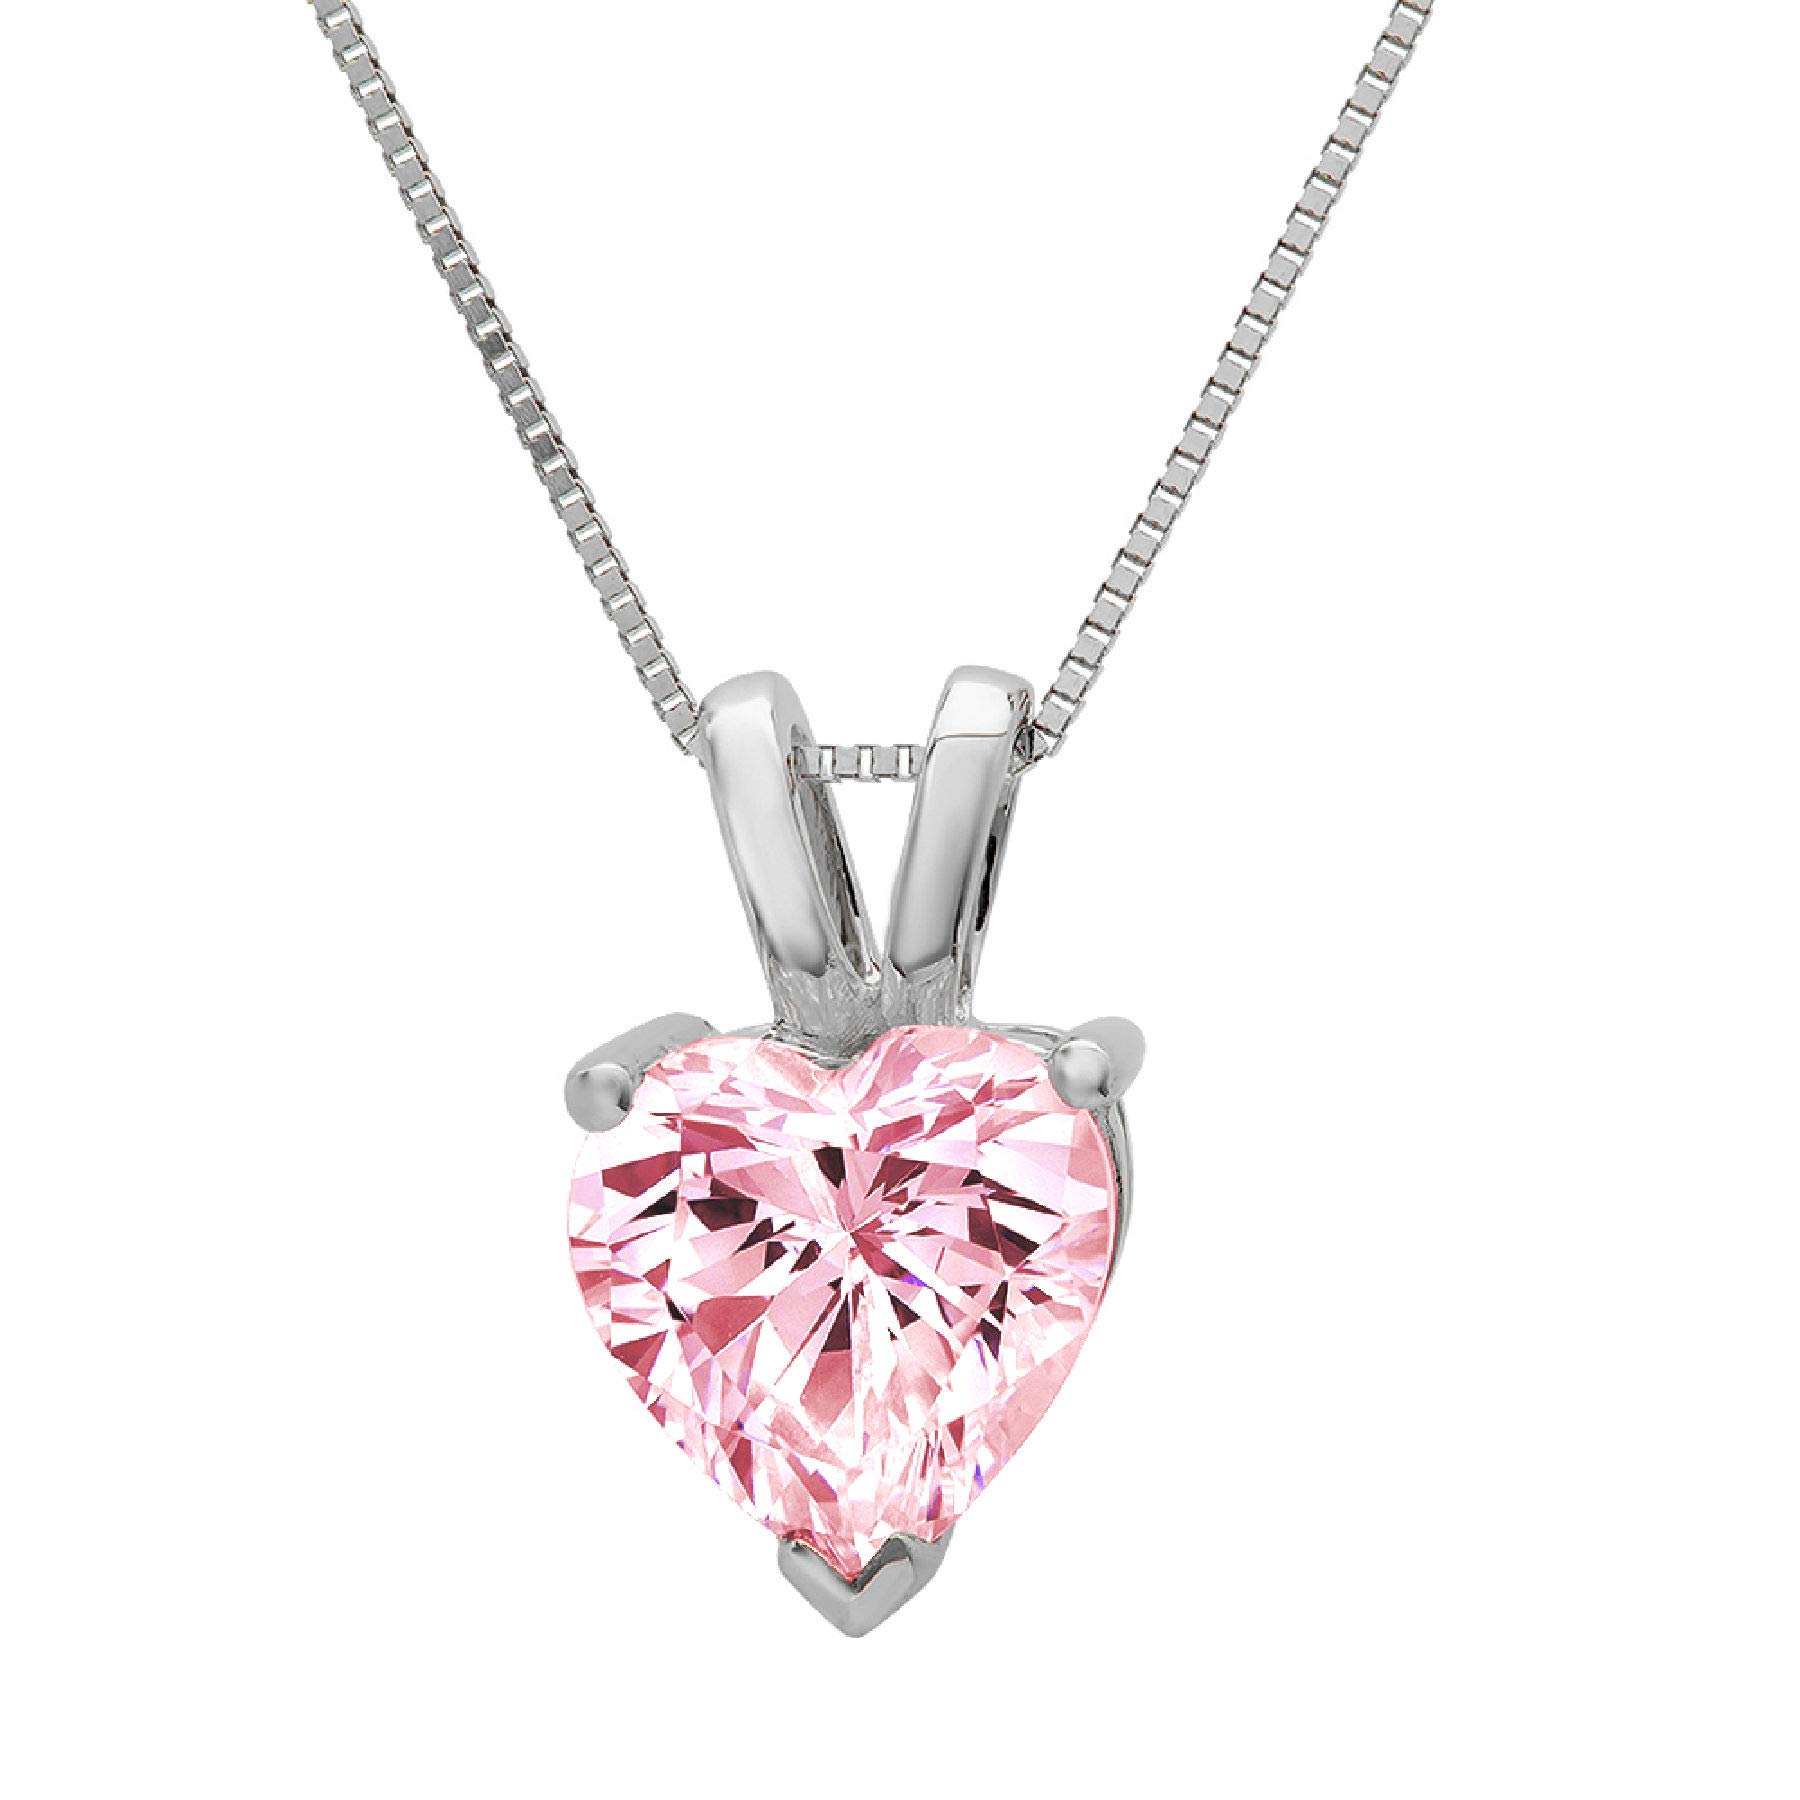 Clara Pucci 0.5 ct Brilliant Heart Cut Stunning Genuine Flawless Pink Simulated Diamond Gemstone Solitaire Pendant Necklace With 18